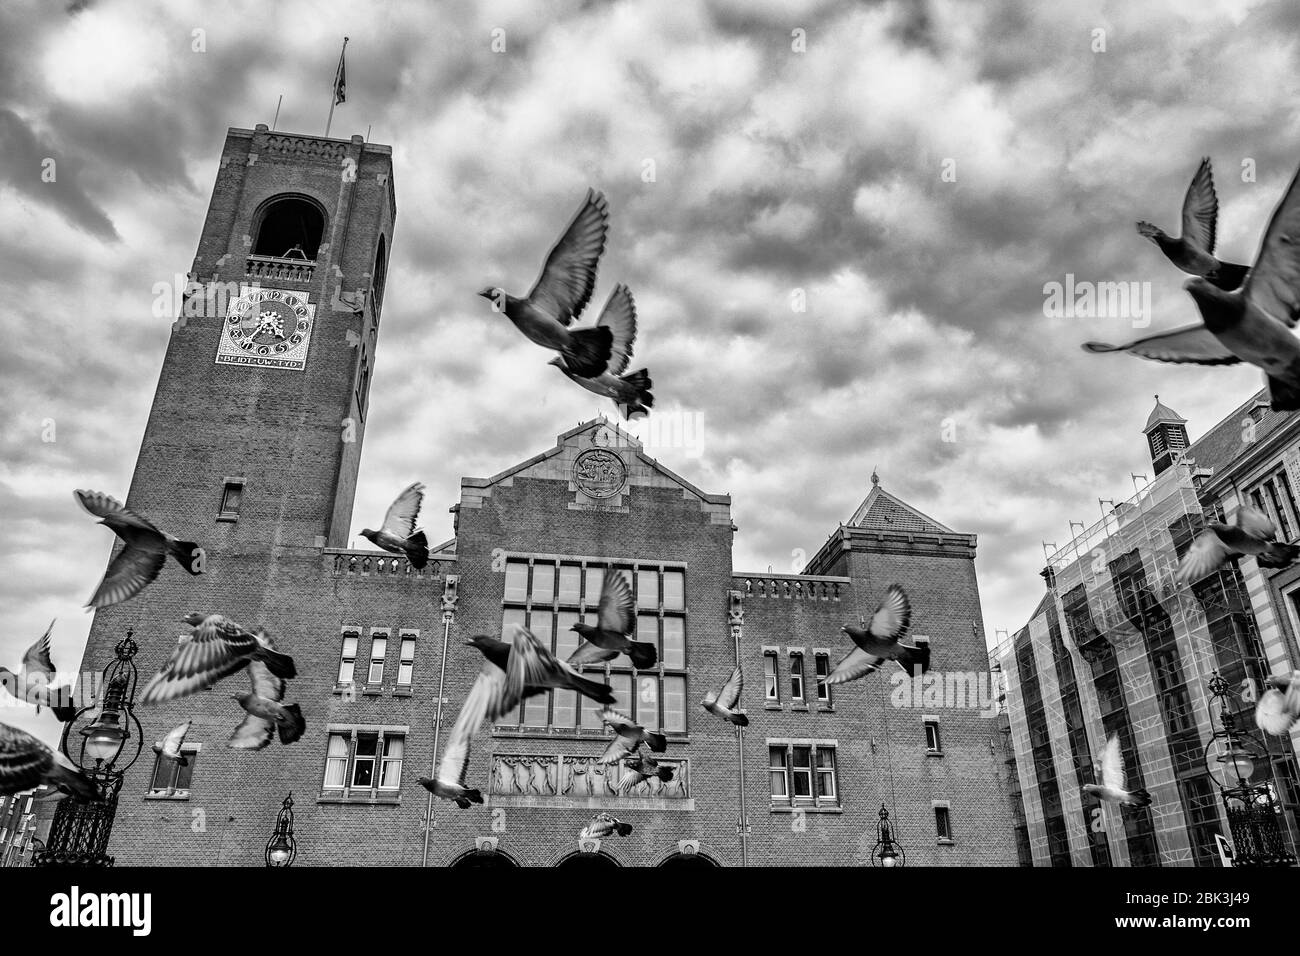 Amsterdam / Netherlands - October 15, 2018: The Beurs van Berlage building in Amsterdam, Netherlands, used as a venue for concerts, exhibitions and co Stock Photo